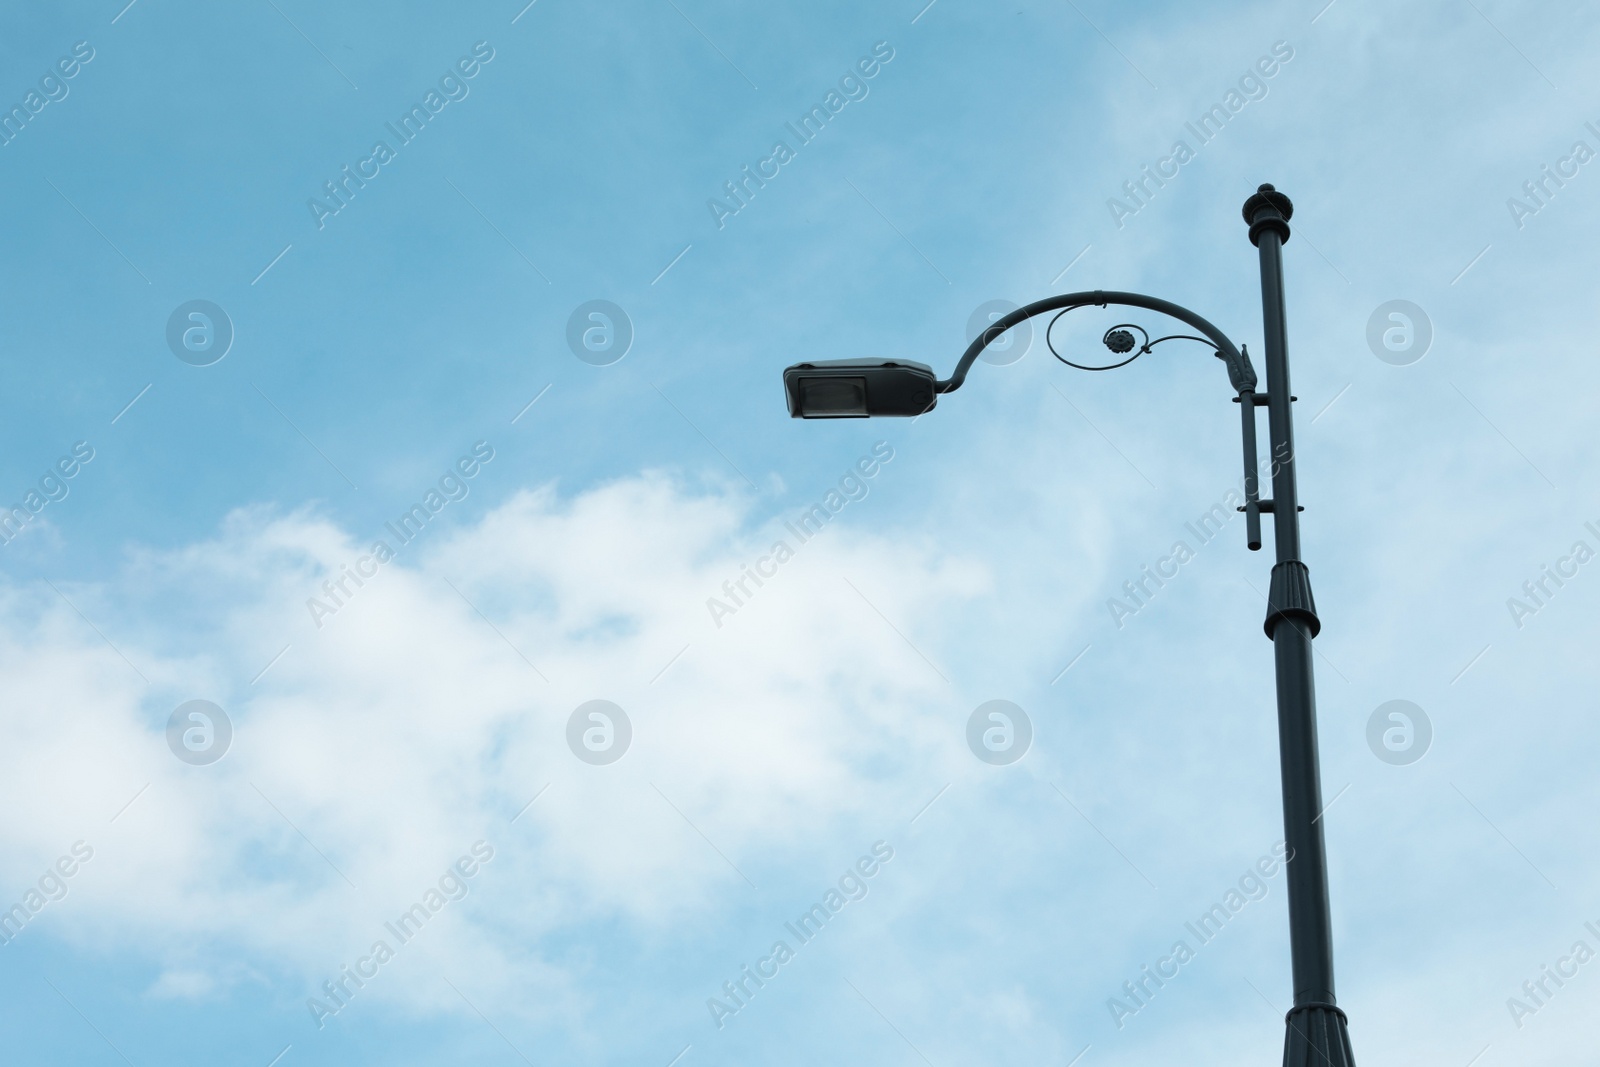 Photo of Street light lamp against cloudy sky, space for text